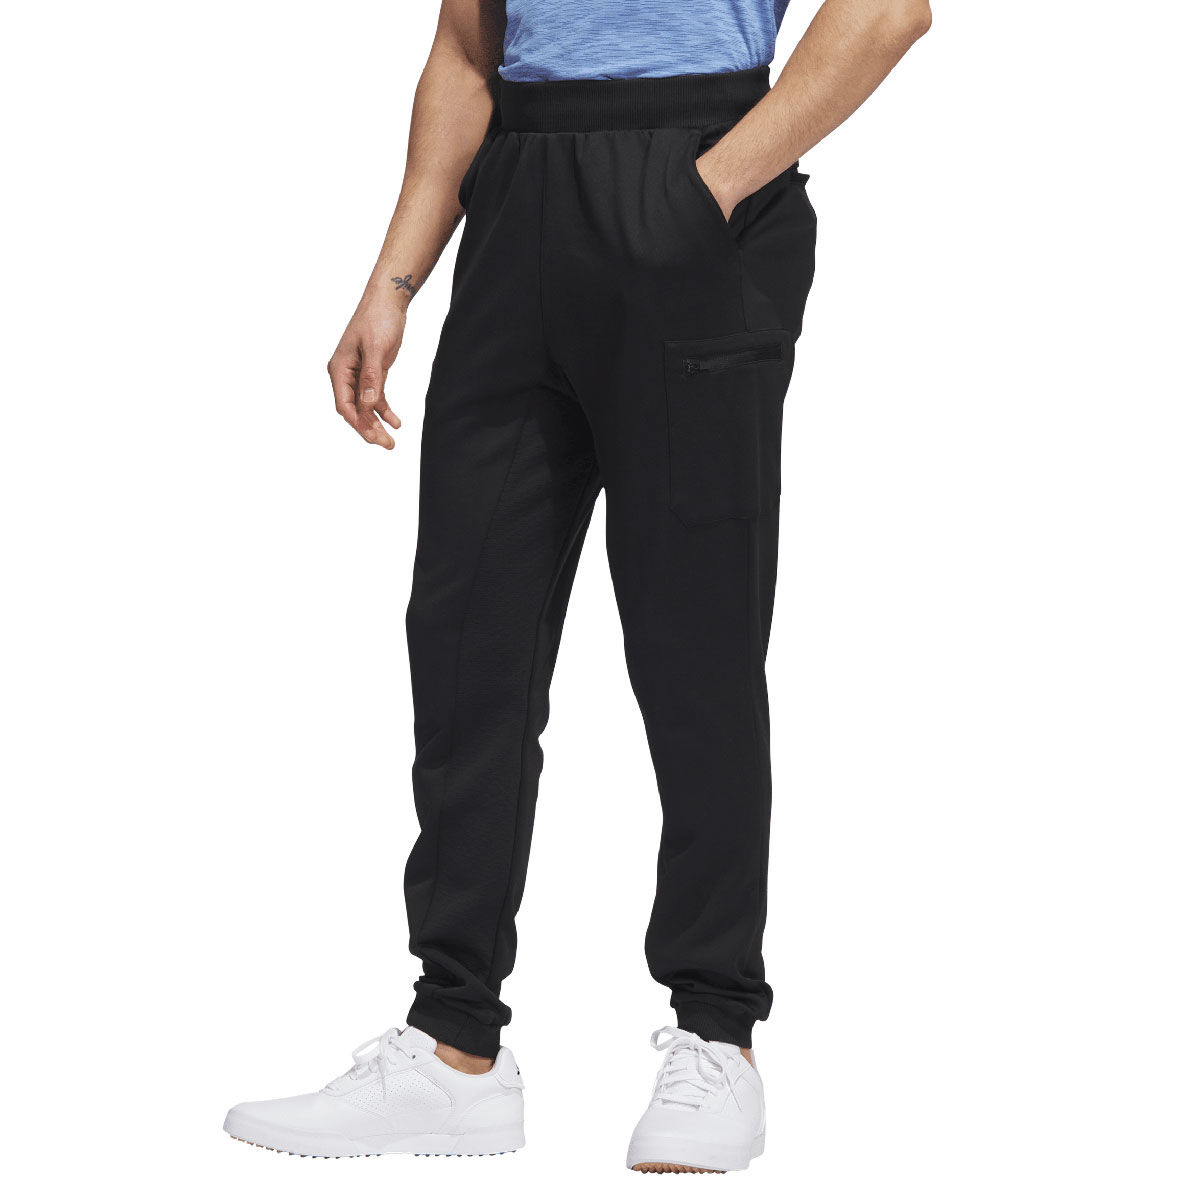 Adidas Climaproof Trousers FOR SALE! - PicClick UK